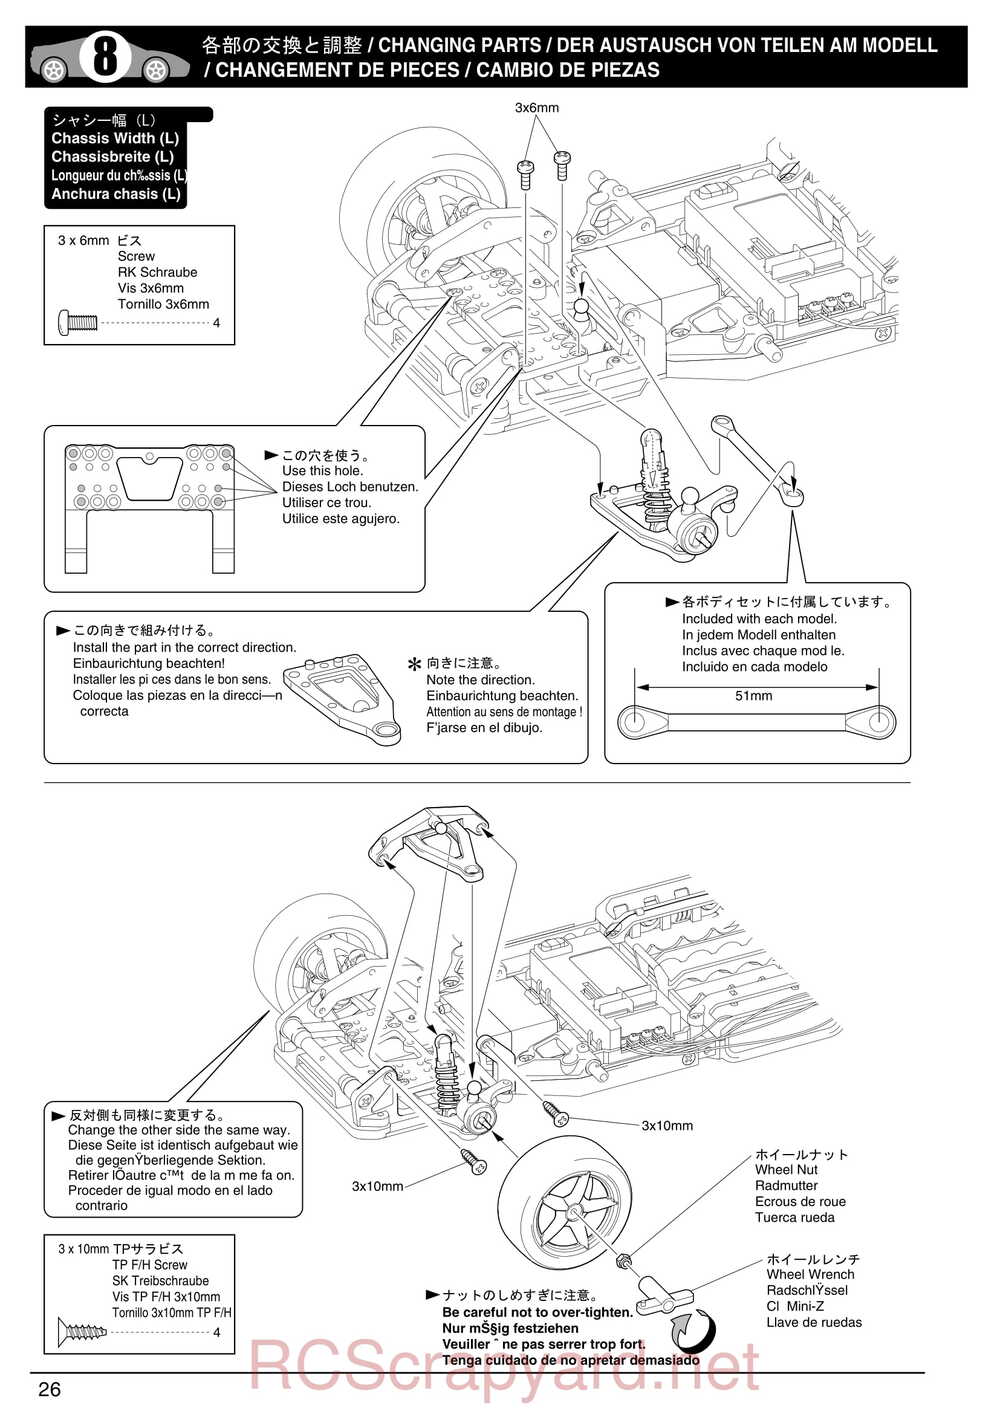 Kyosho - 30551 - a12 Sport - Manual - Page 26